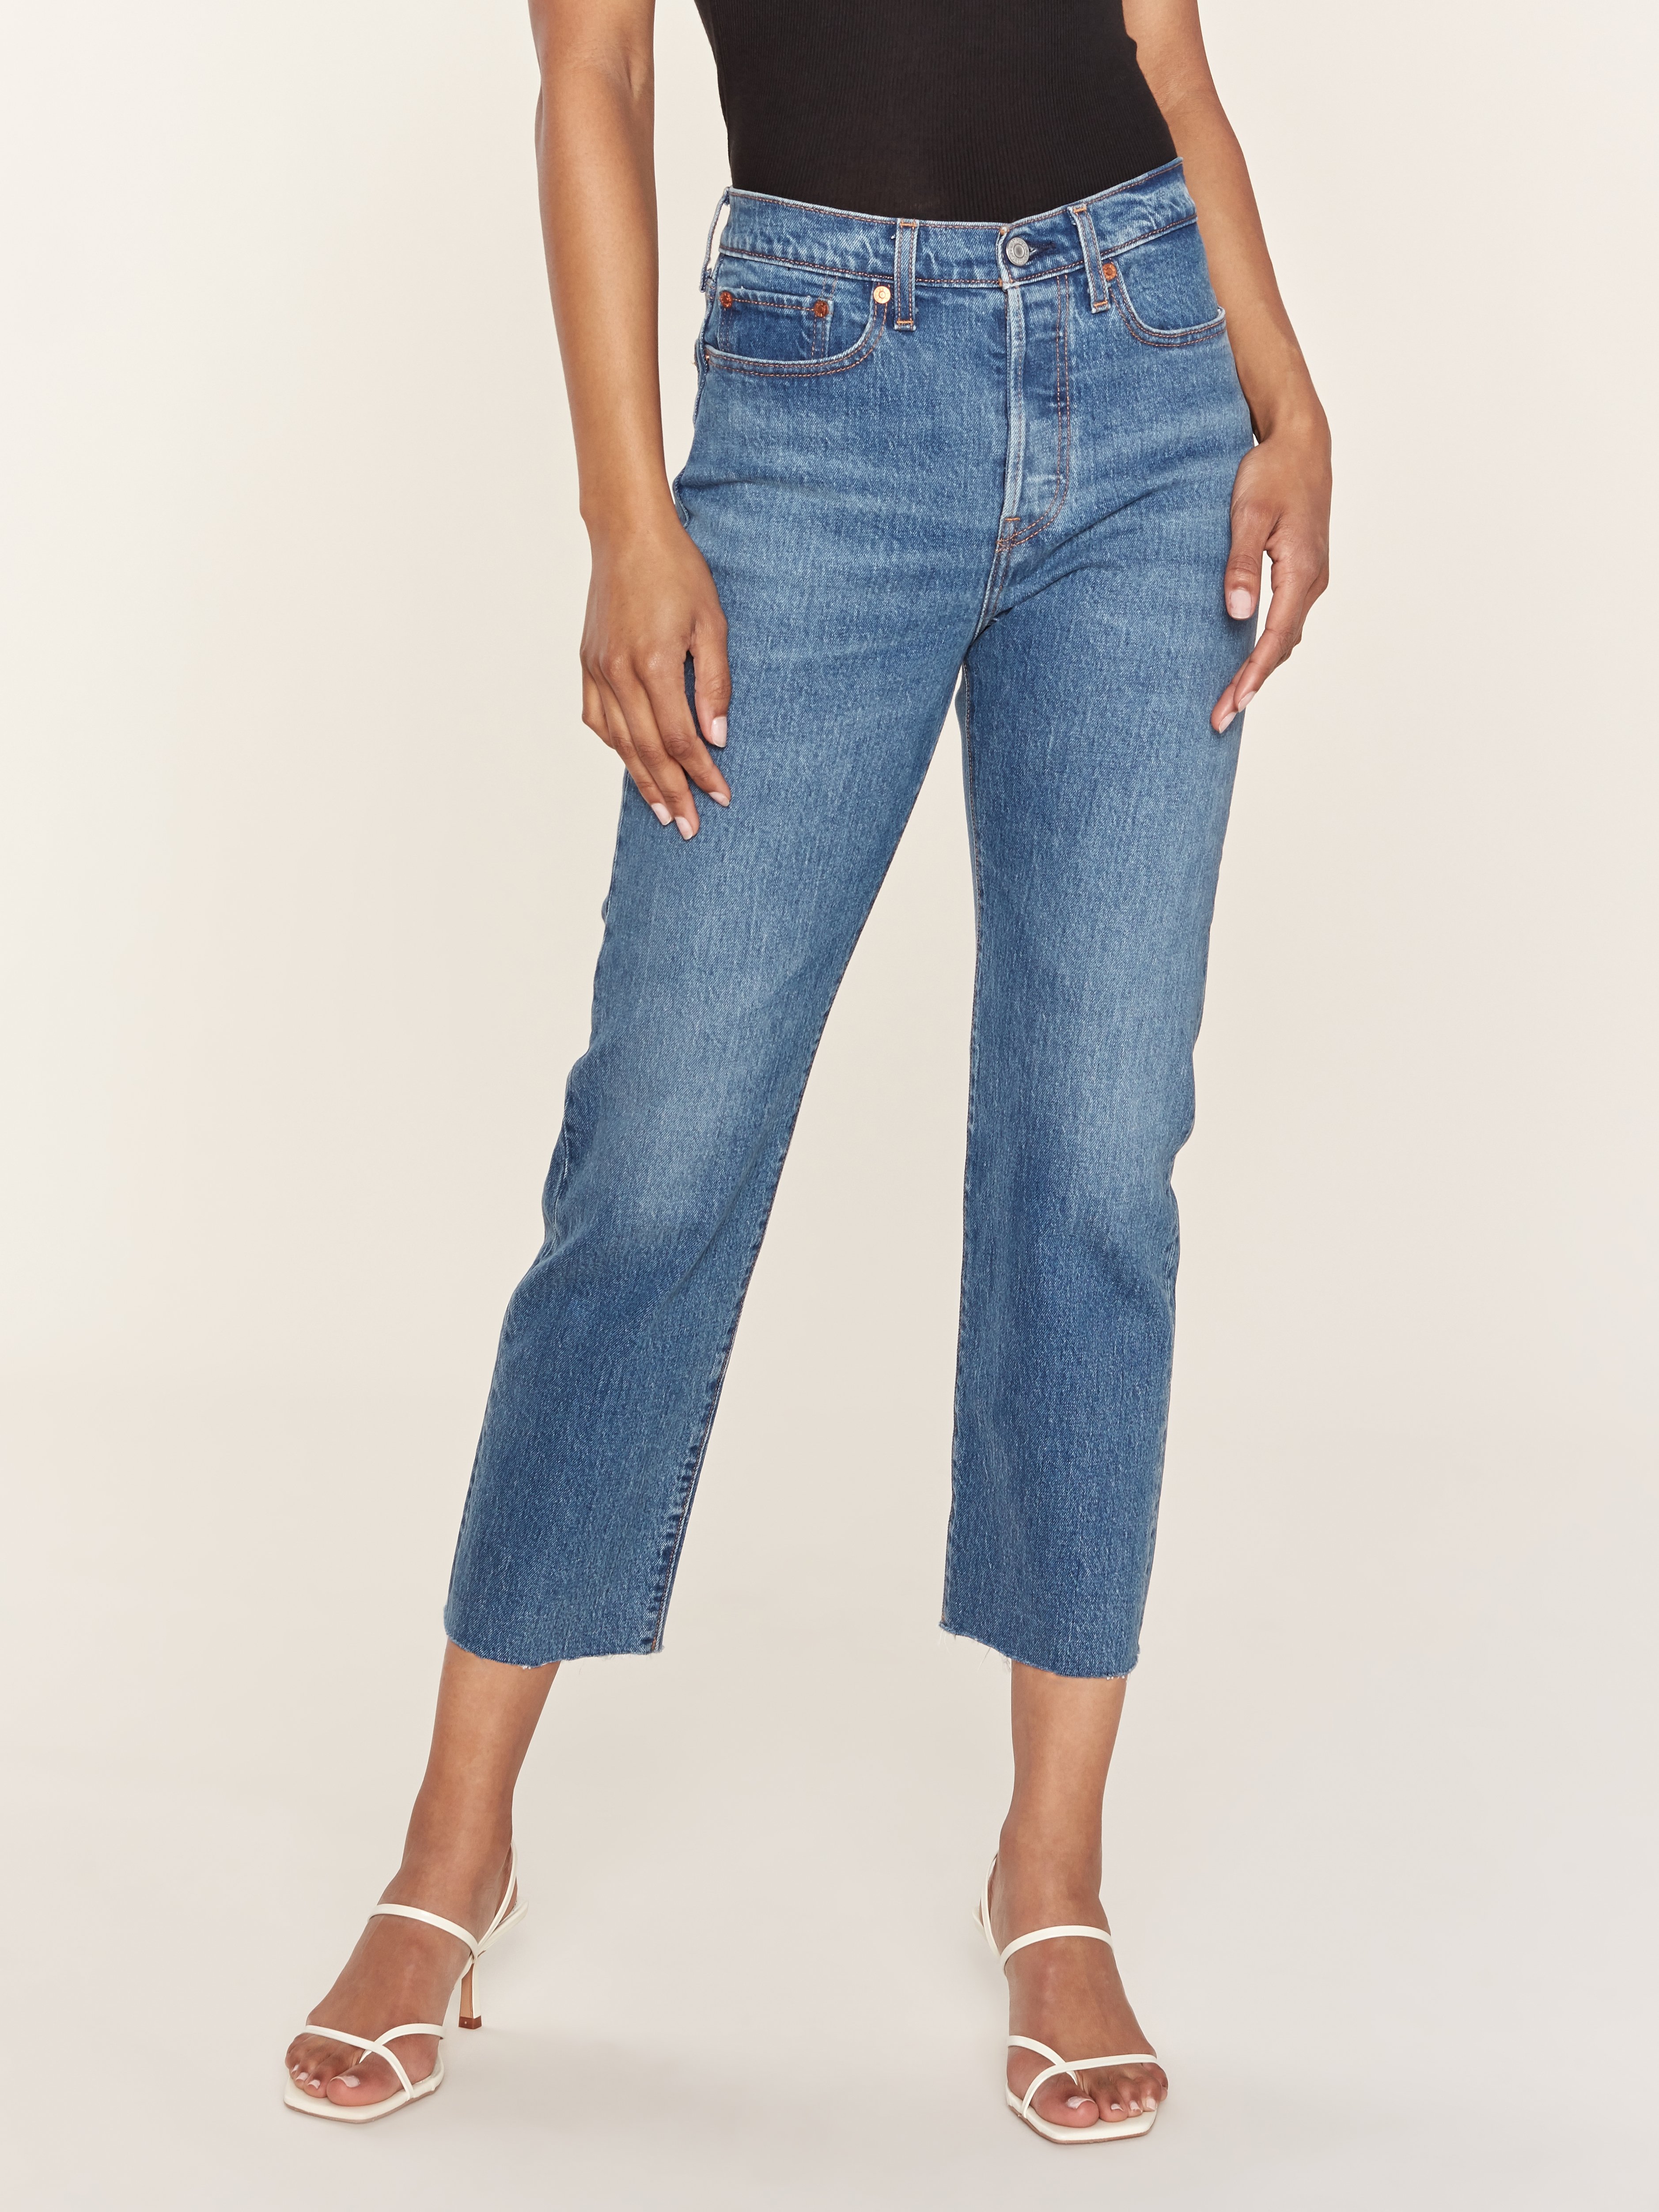 levi's wedgie fit high rise jeans